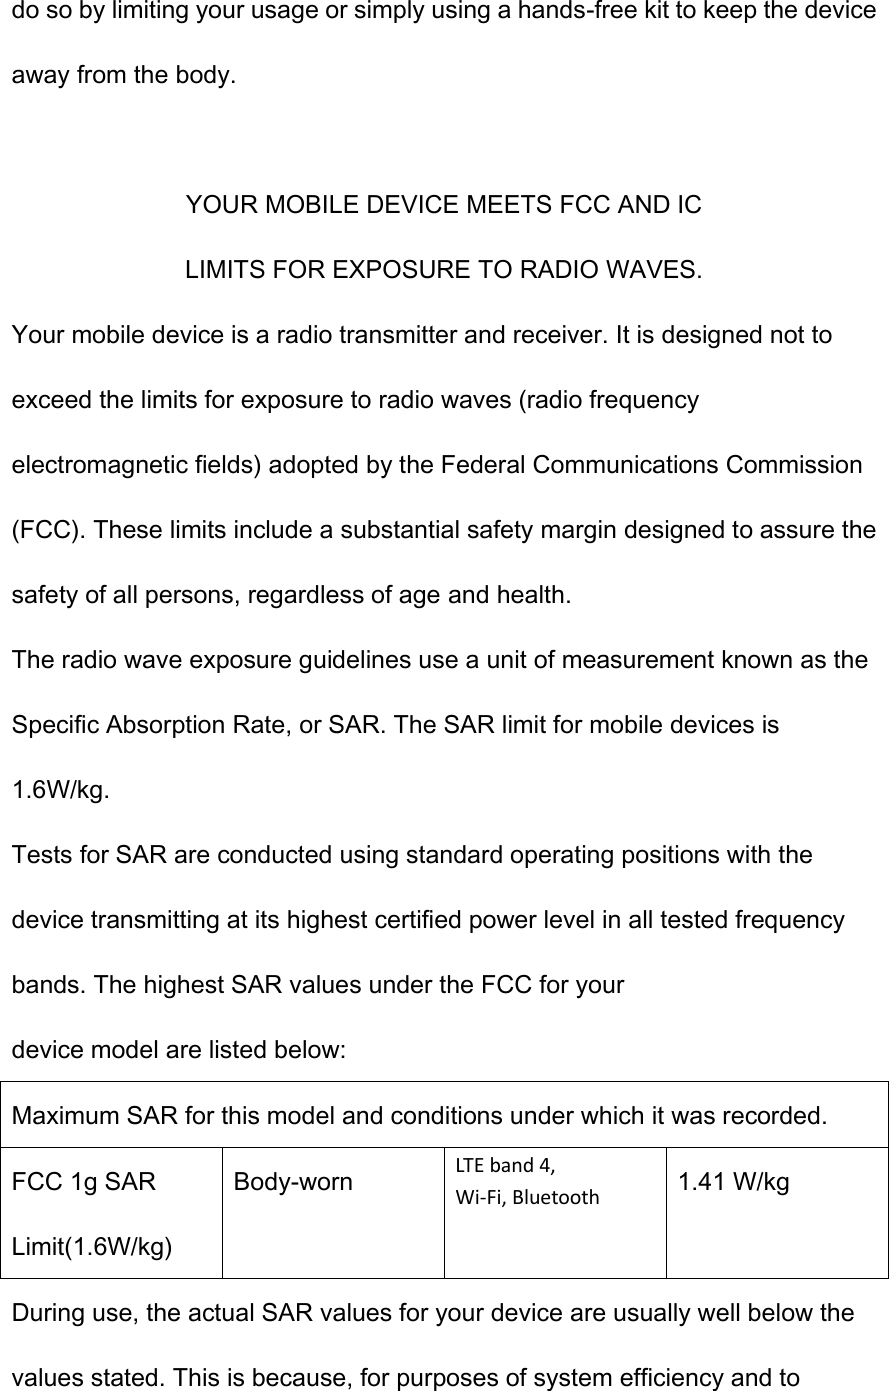 do so by limiting your usage or simply using a hands-free kit to keep the device away from the body.  YOUR MOBILE DEVICE MEETS FCC AND IC LIMITS FOR EXPOSURE TO RADIO WAVES. Your mobile device is a radio transmitter and receiver. It is designed not to exceed the limits for exposure to radio waves (radio frequency electromagnetic fields) adopted by the Federal Communications Commission (FCC). These limits include a substantial safety margin designed to assure the safety of all persons, regardless of age and health. The radio wave exposure guidelines use a unit of measurement known as the Specific Absorption Rate, or SAR. The SAR limit for mobile devices is 1.6W/kg. Tests for SAR are conducted using standard operating positions with the device transmitting at its highest certified power level in all tested frequency bands. The highest SAR values under the FCC for your device model are listed below: Maximum SAR for this model and conditions under which it was recorded. FCC 1g SAR Limit(1.6W/kg) Body-worn LTE band 4, Wi-Fi, Bluetooth 1.41 W/kg During use, the actual SAR values for your device are usually well below the values stated. This is because, for purposes of system efficiency and to 